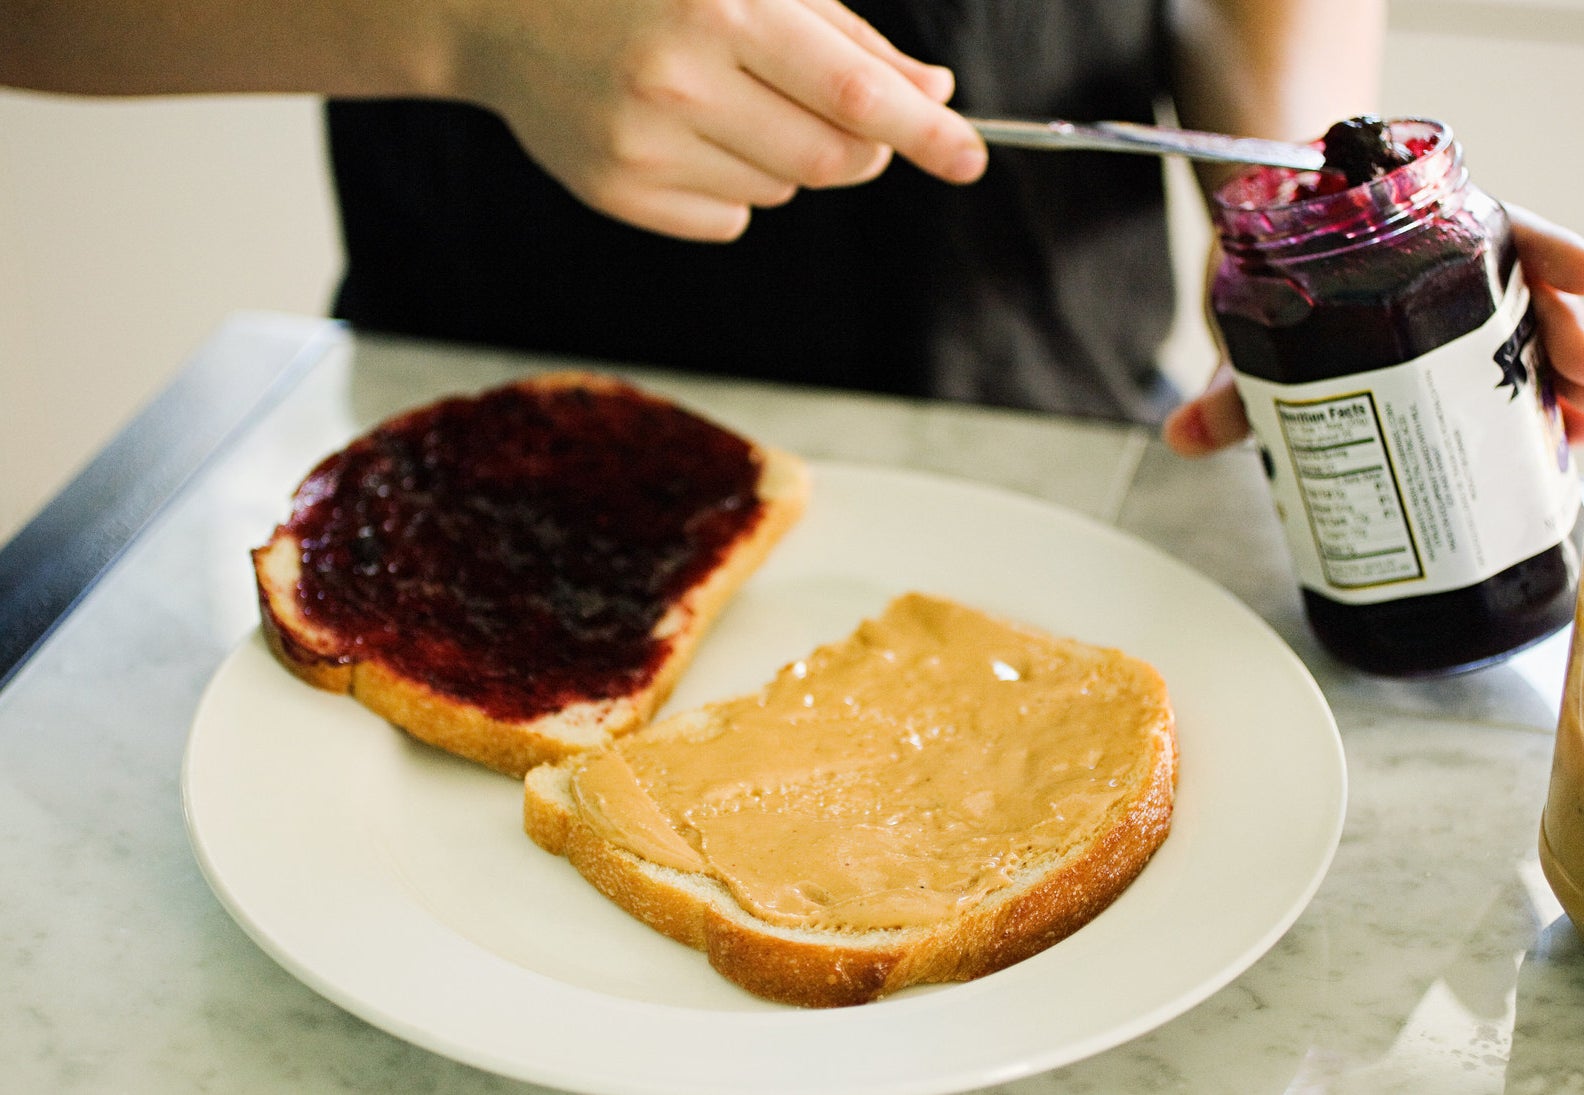 Making a peanut butter and jelly sandwich